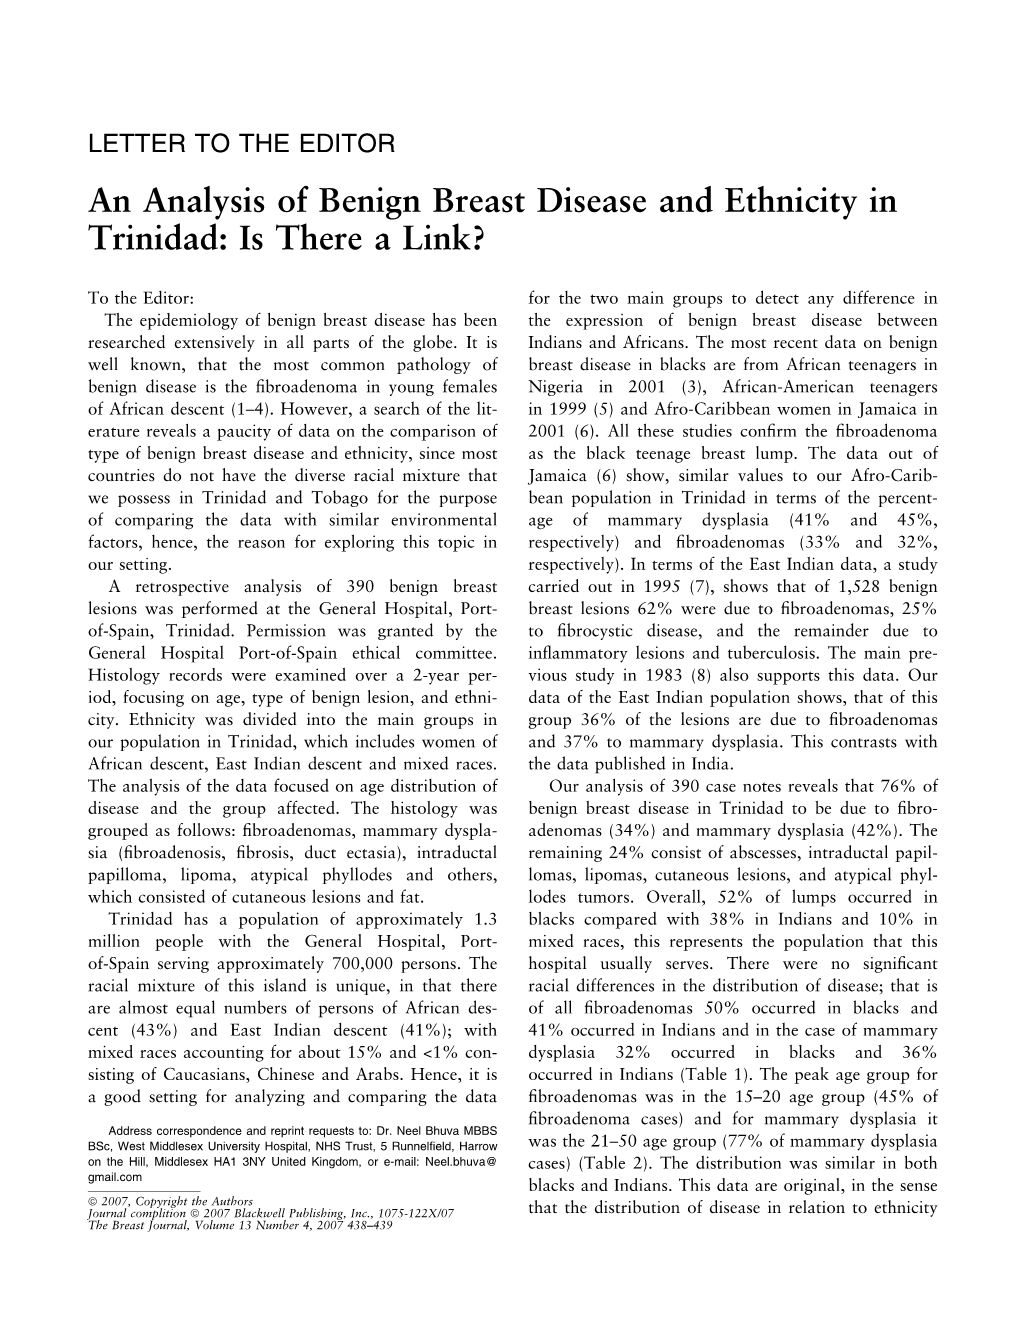 An Analysis of Benign Breast Disease and Ethnicity in Trinidad: Is There a Link?